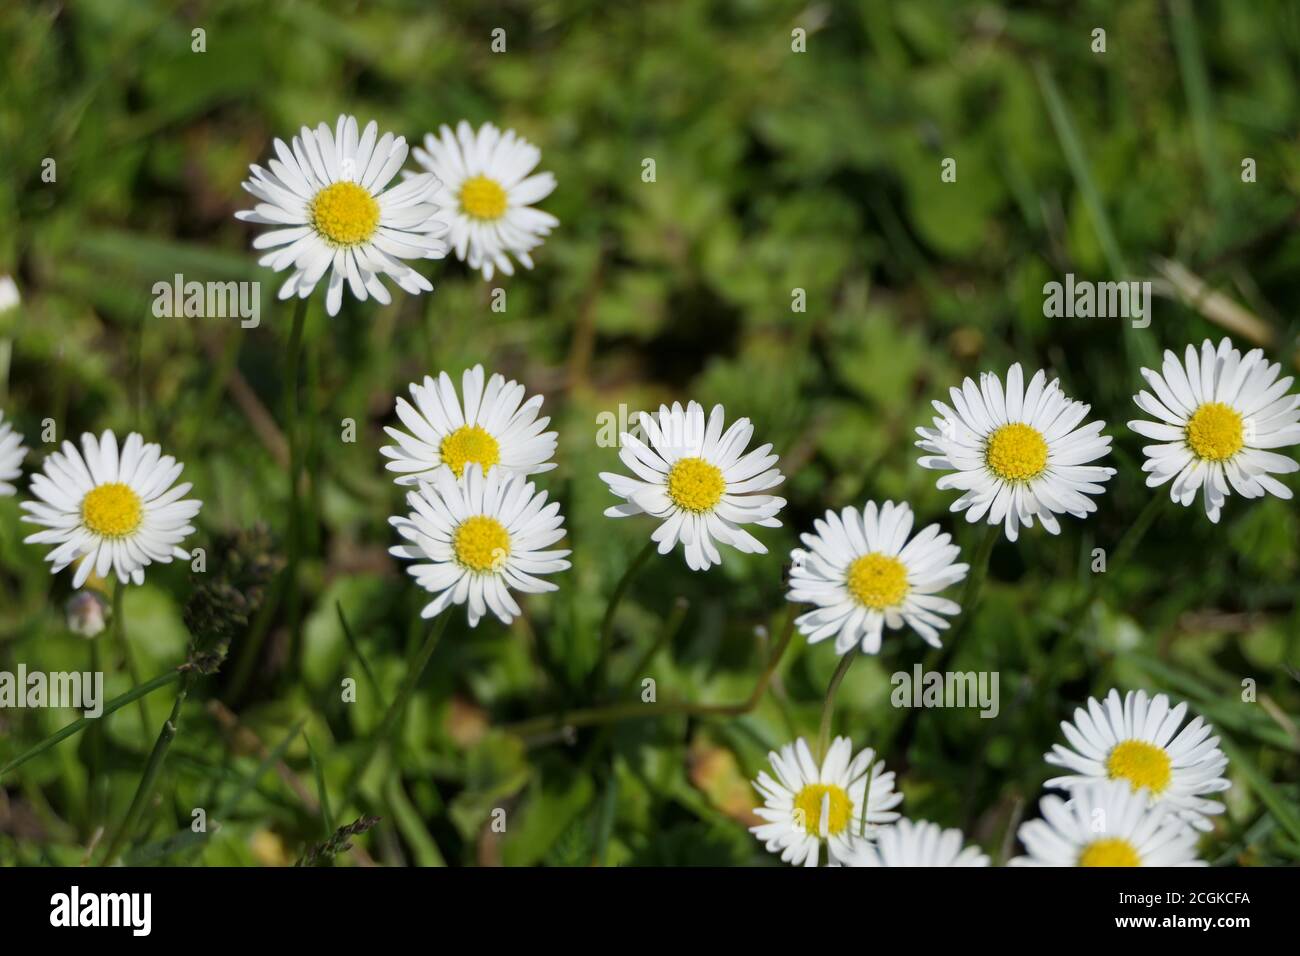 Cheerful summer meadow with marguerites called daisies Stock Photo